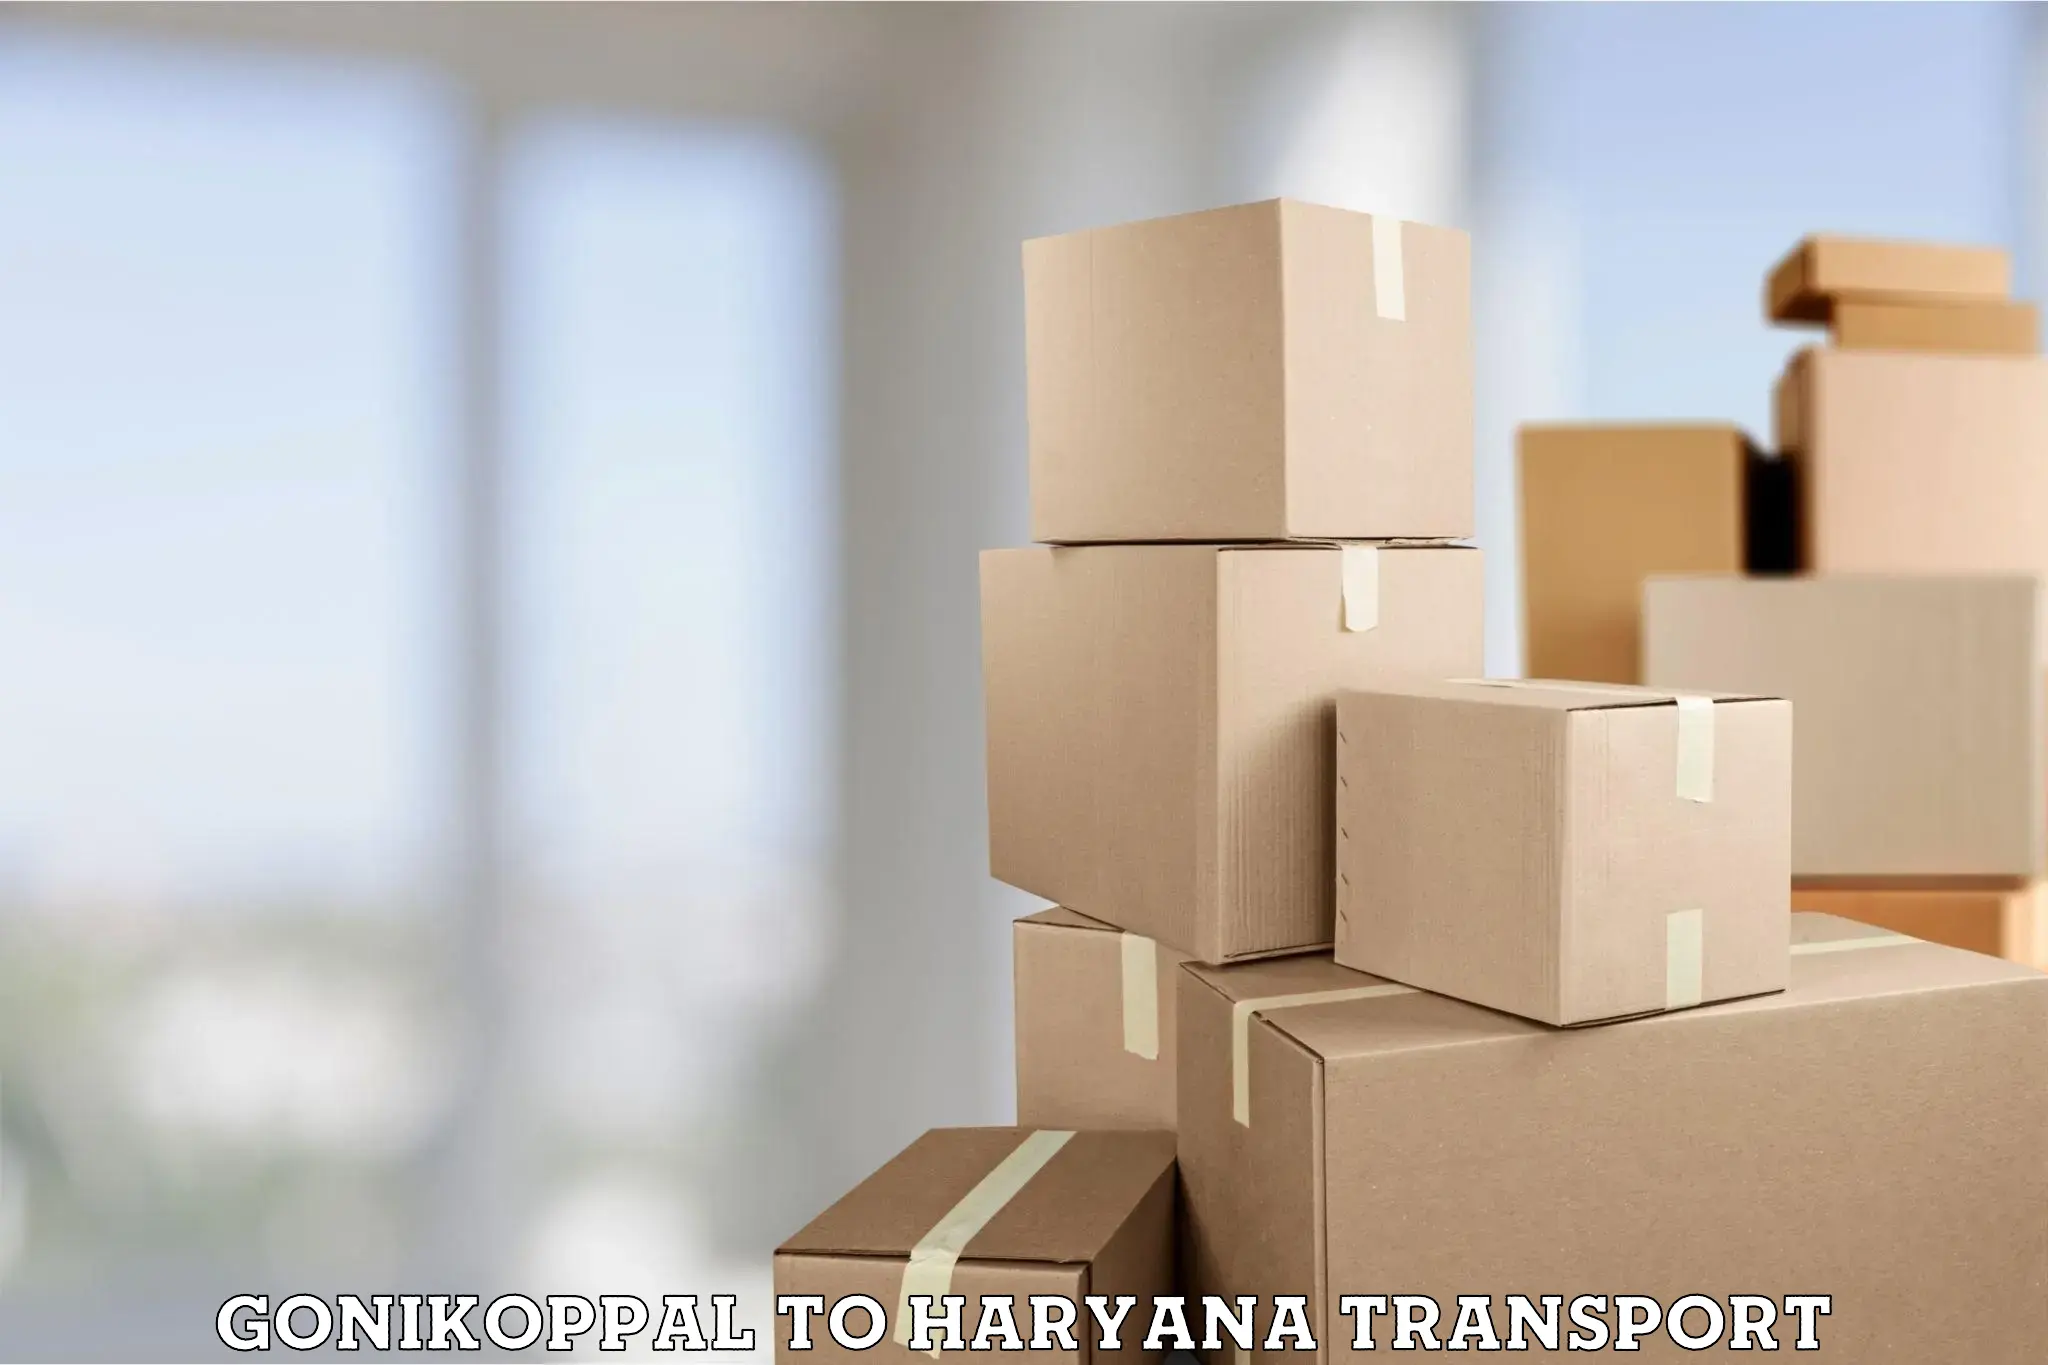 Container transport service Gonikoppal to Gurgaon